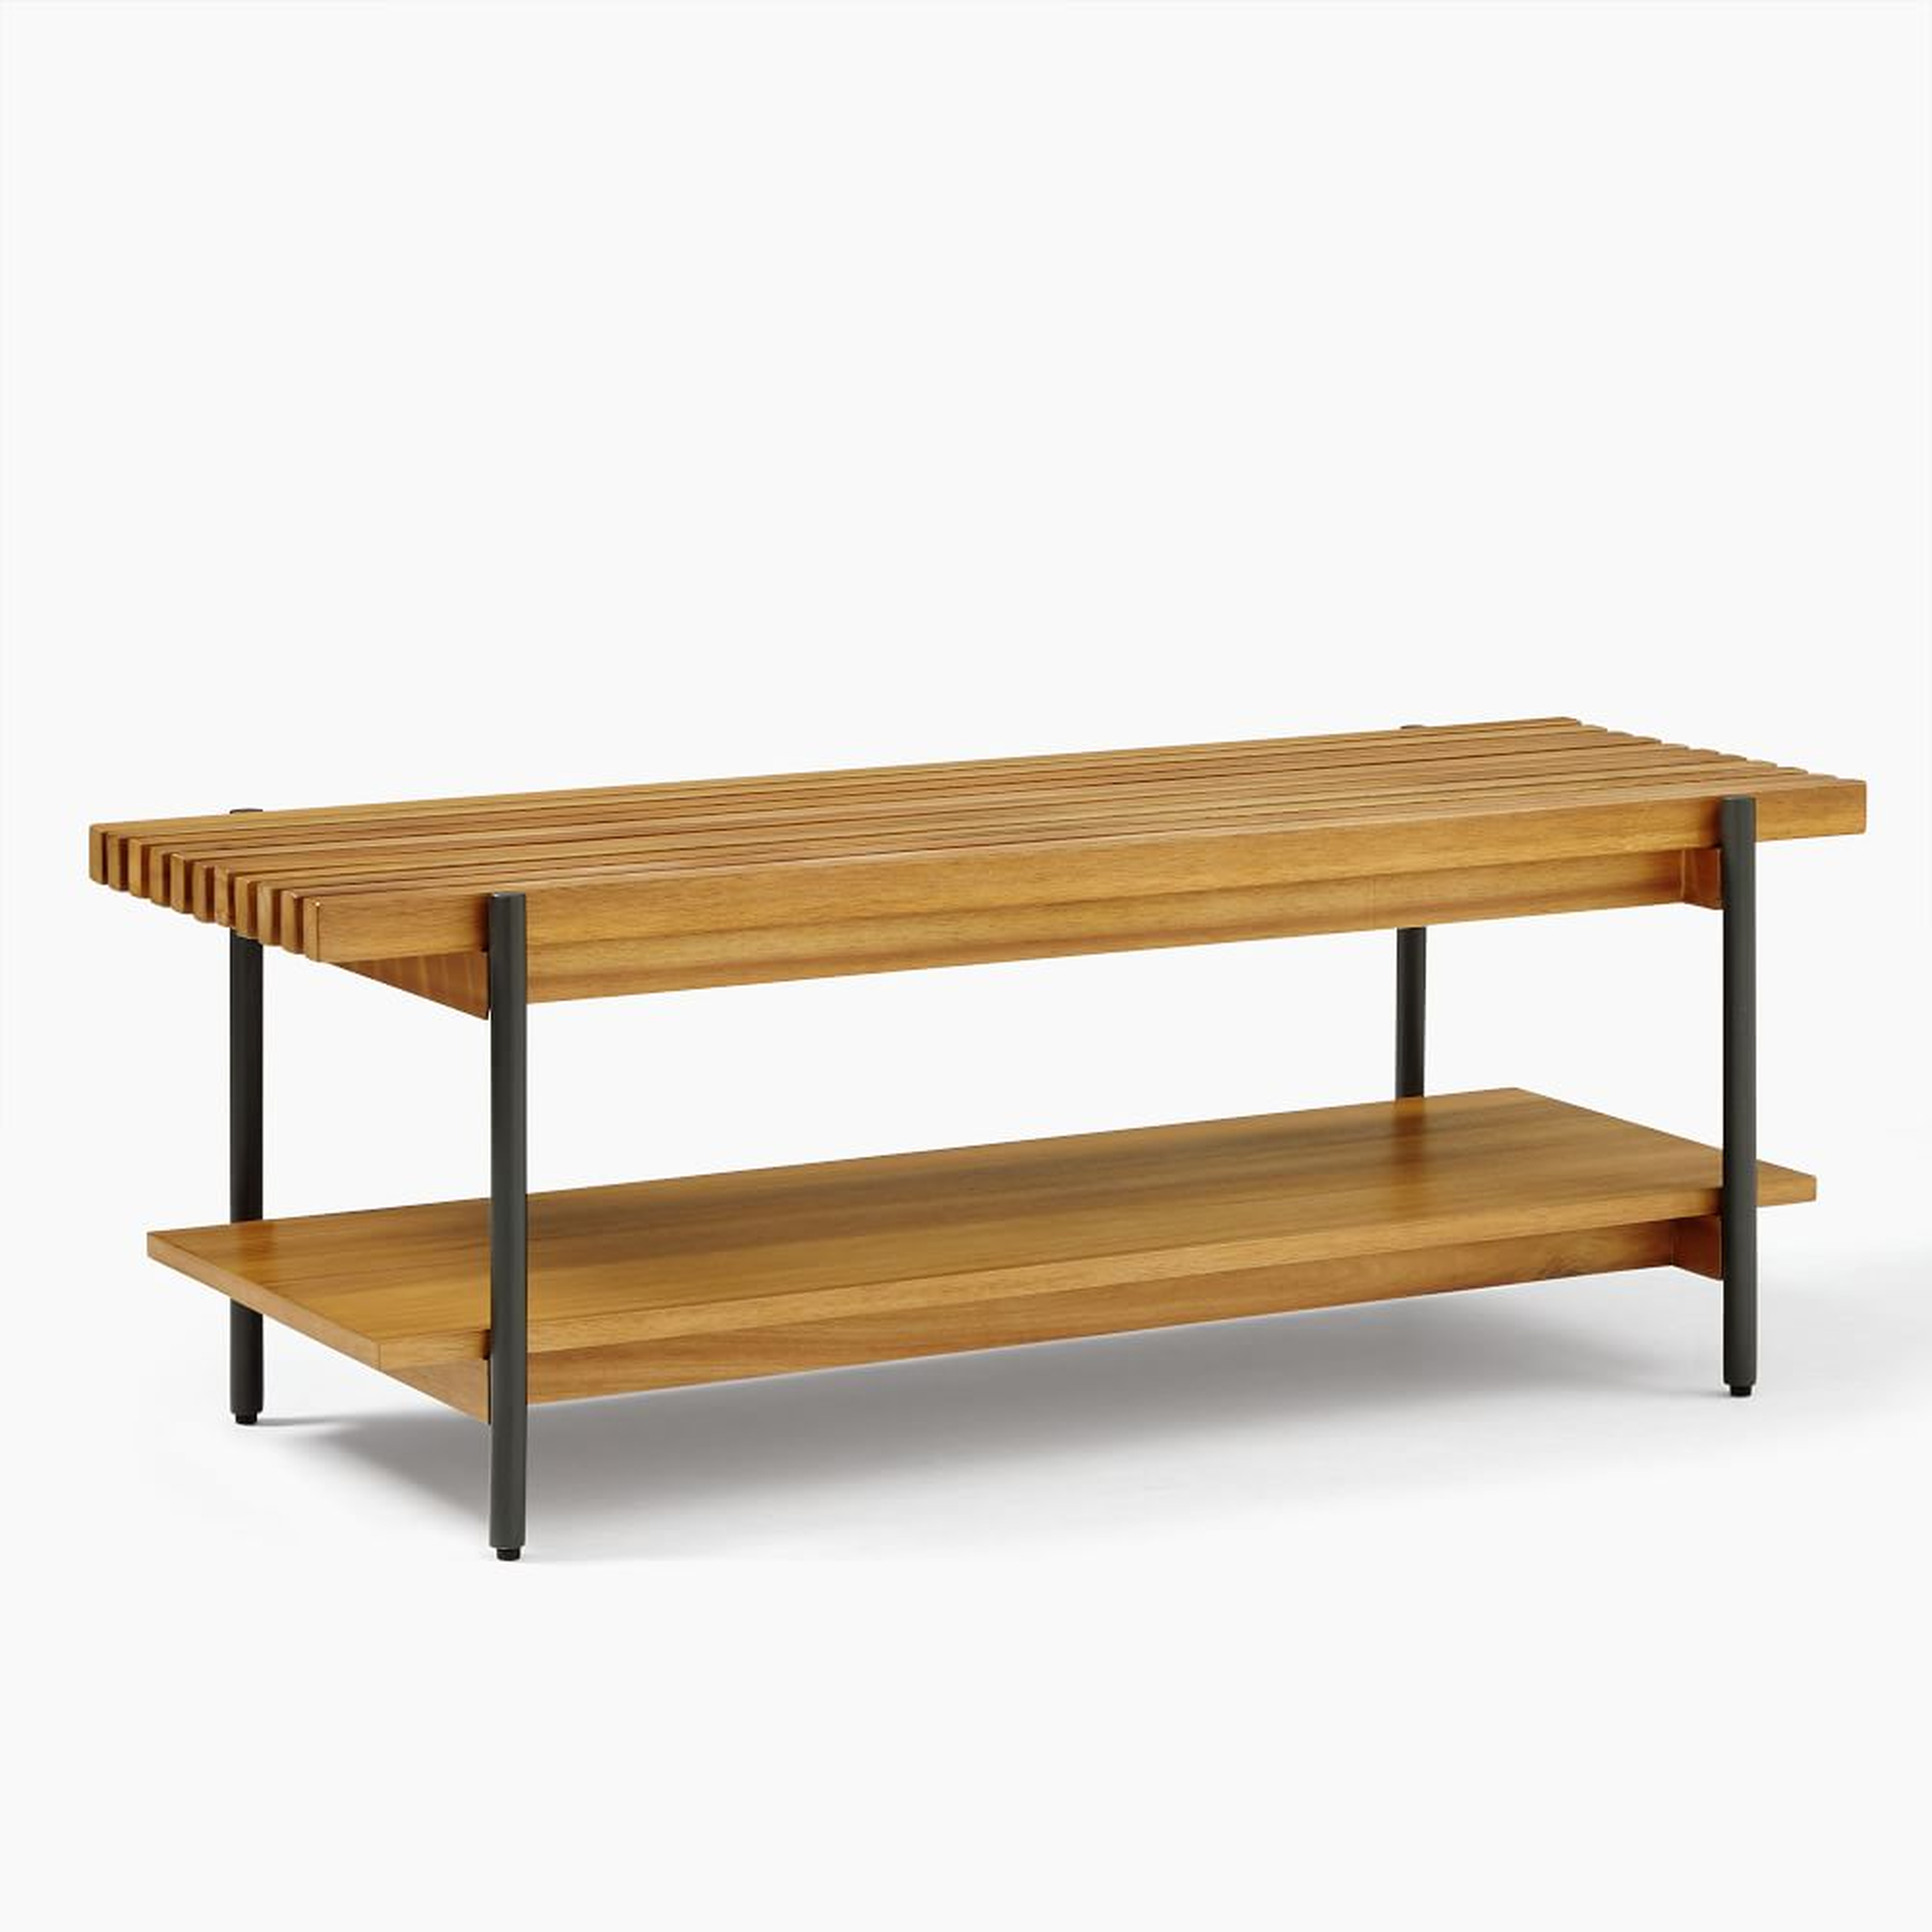 Slatted Wood Rectangle Bench/Coffee Table, Antique Bronze - West Elm